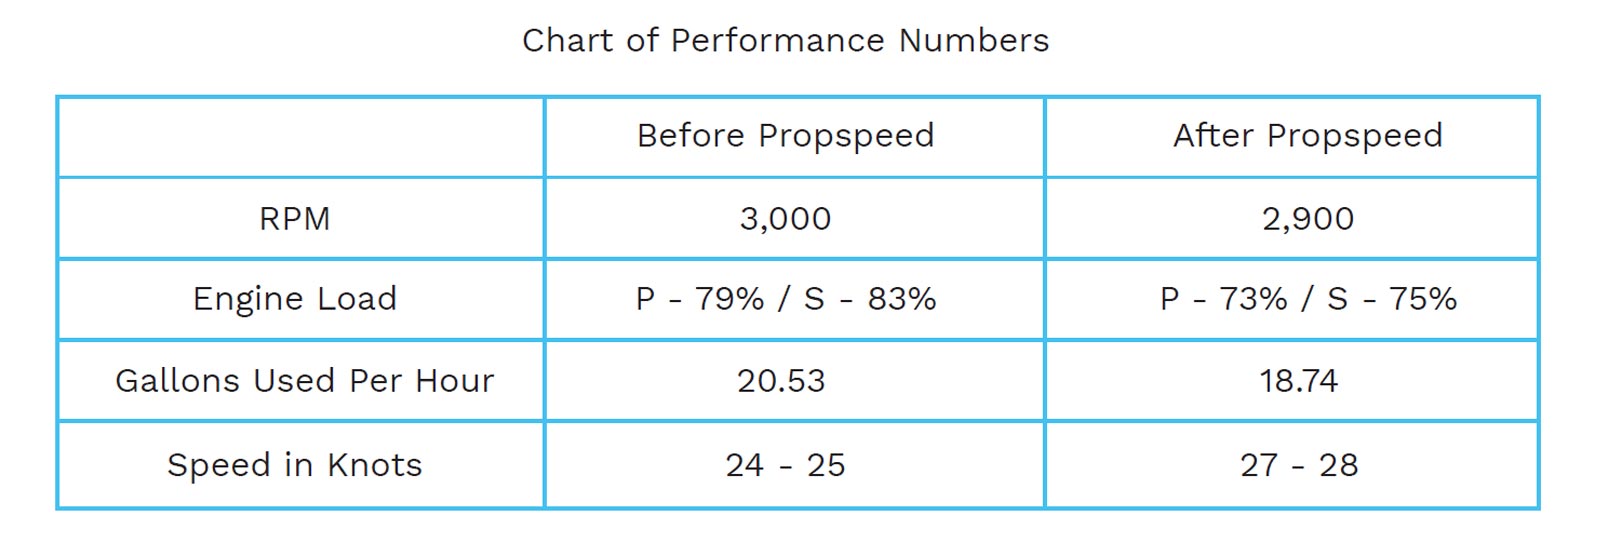 Sea Ray performance numbers before and after Propspeed